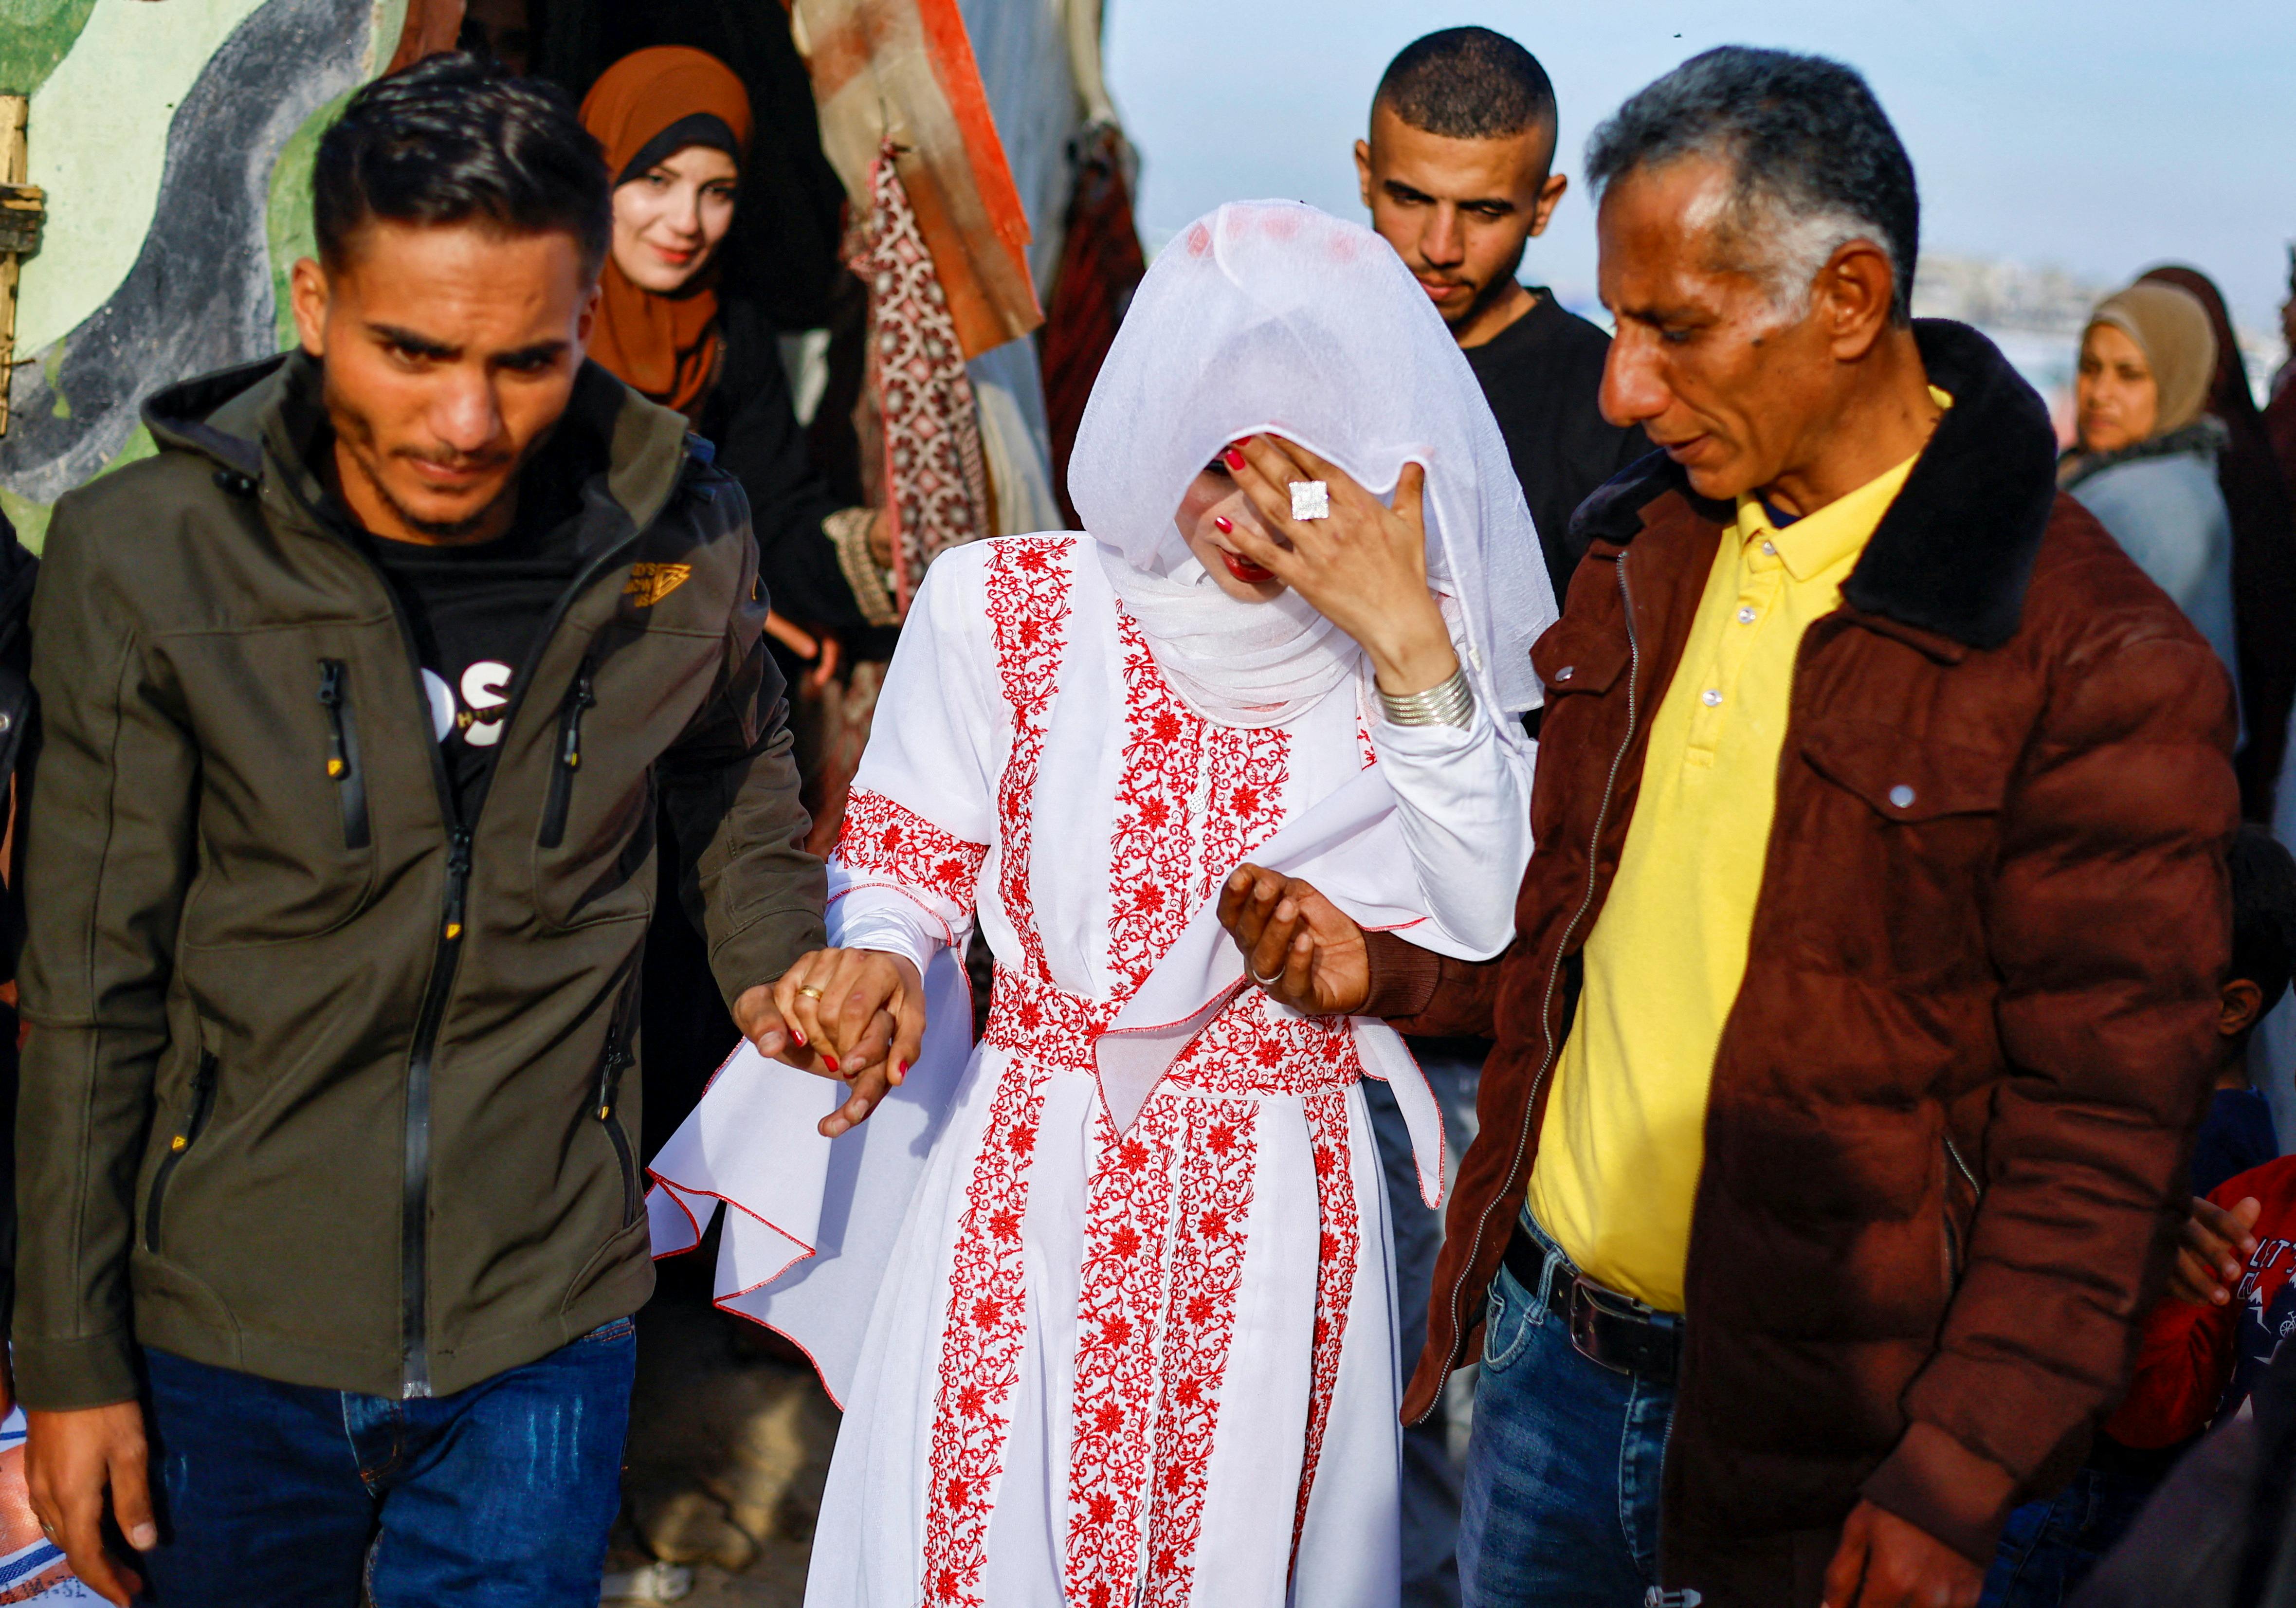 Gaza couple marry in tent city by barbed wire border fence | SaltWire